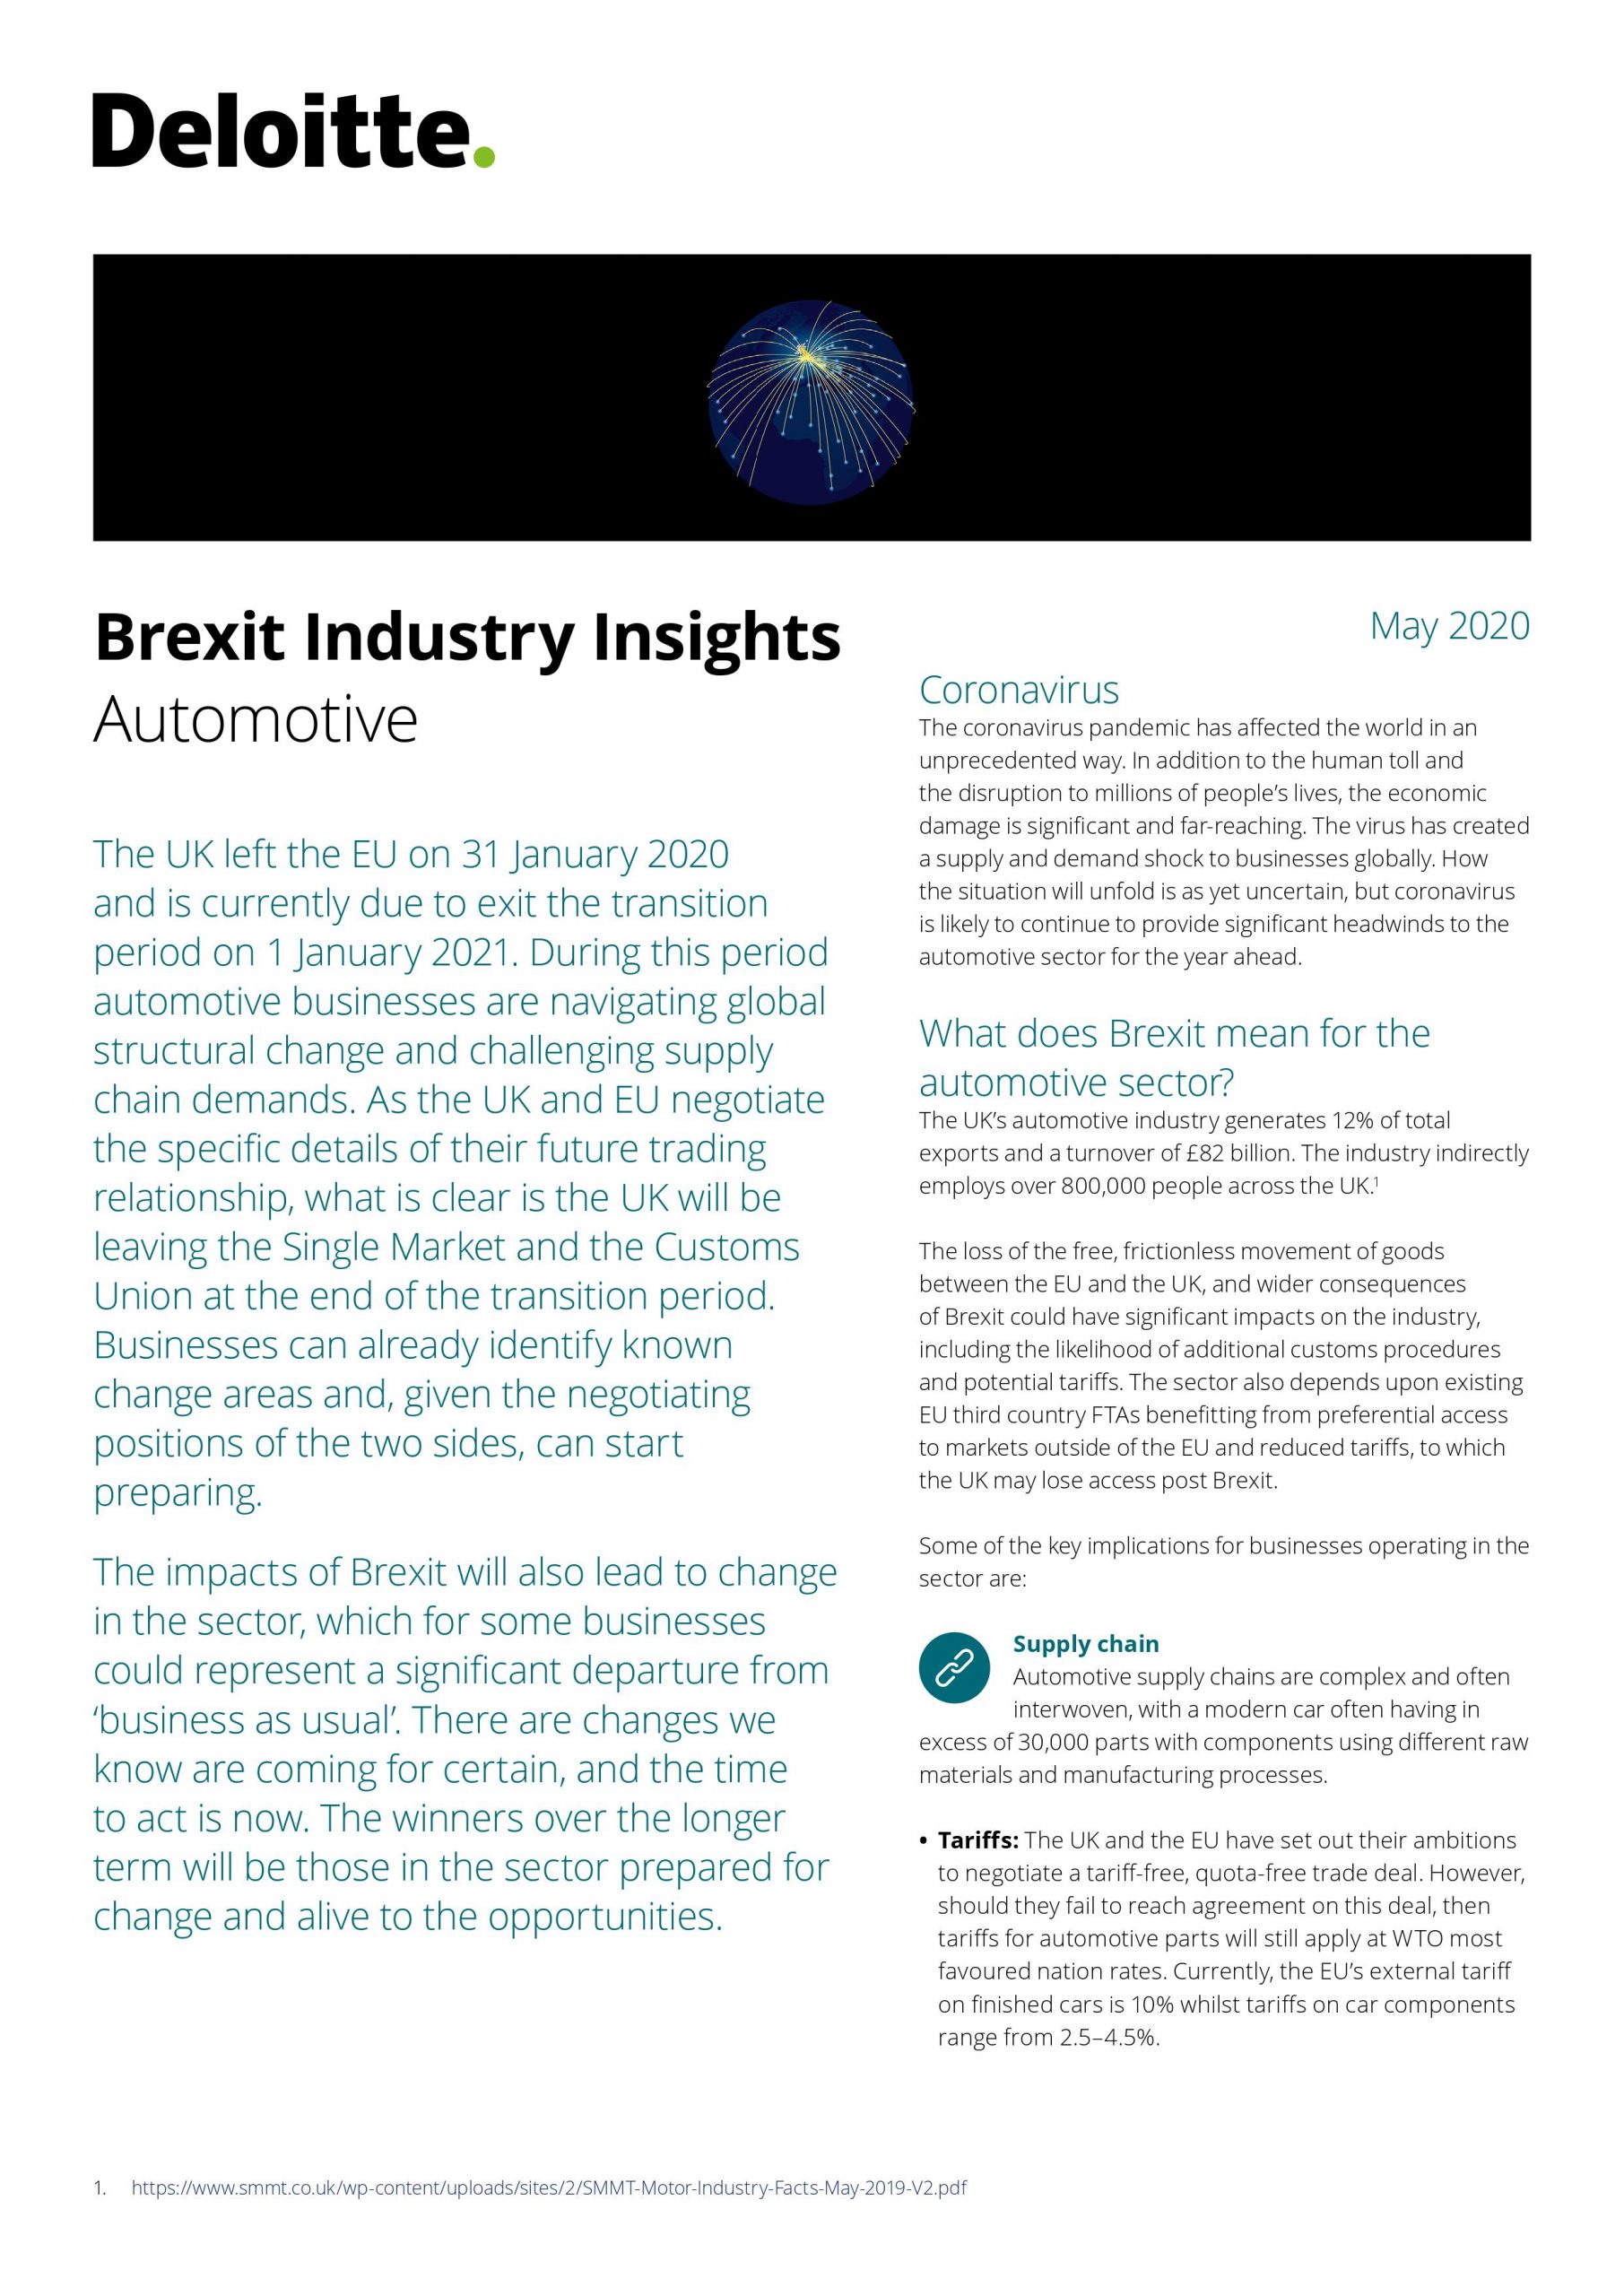 Brexit Industry Insights